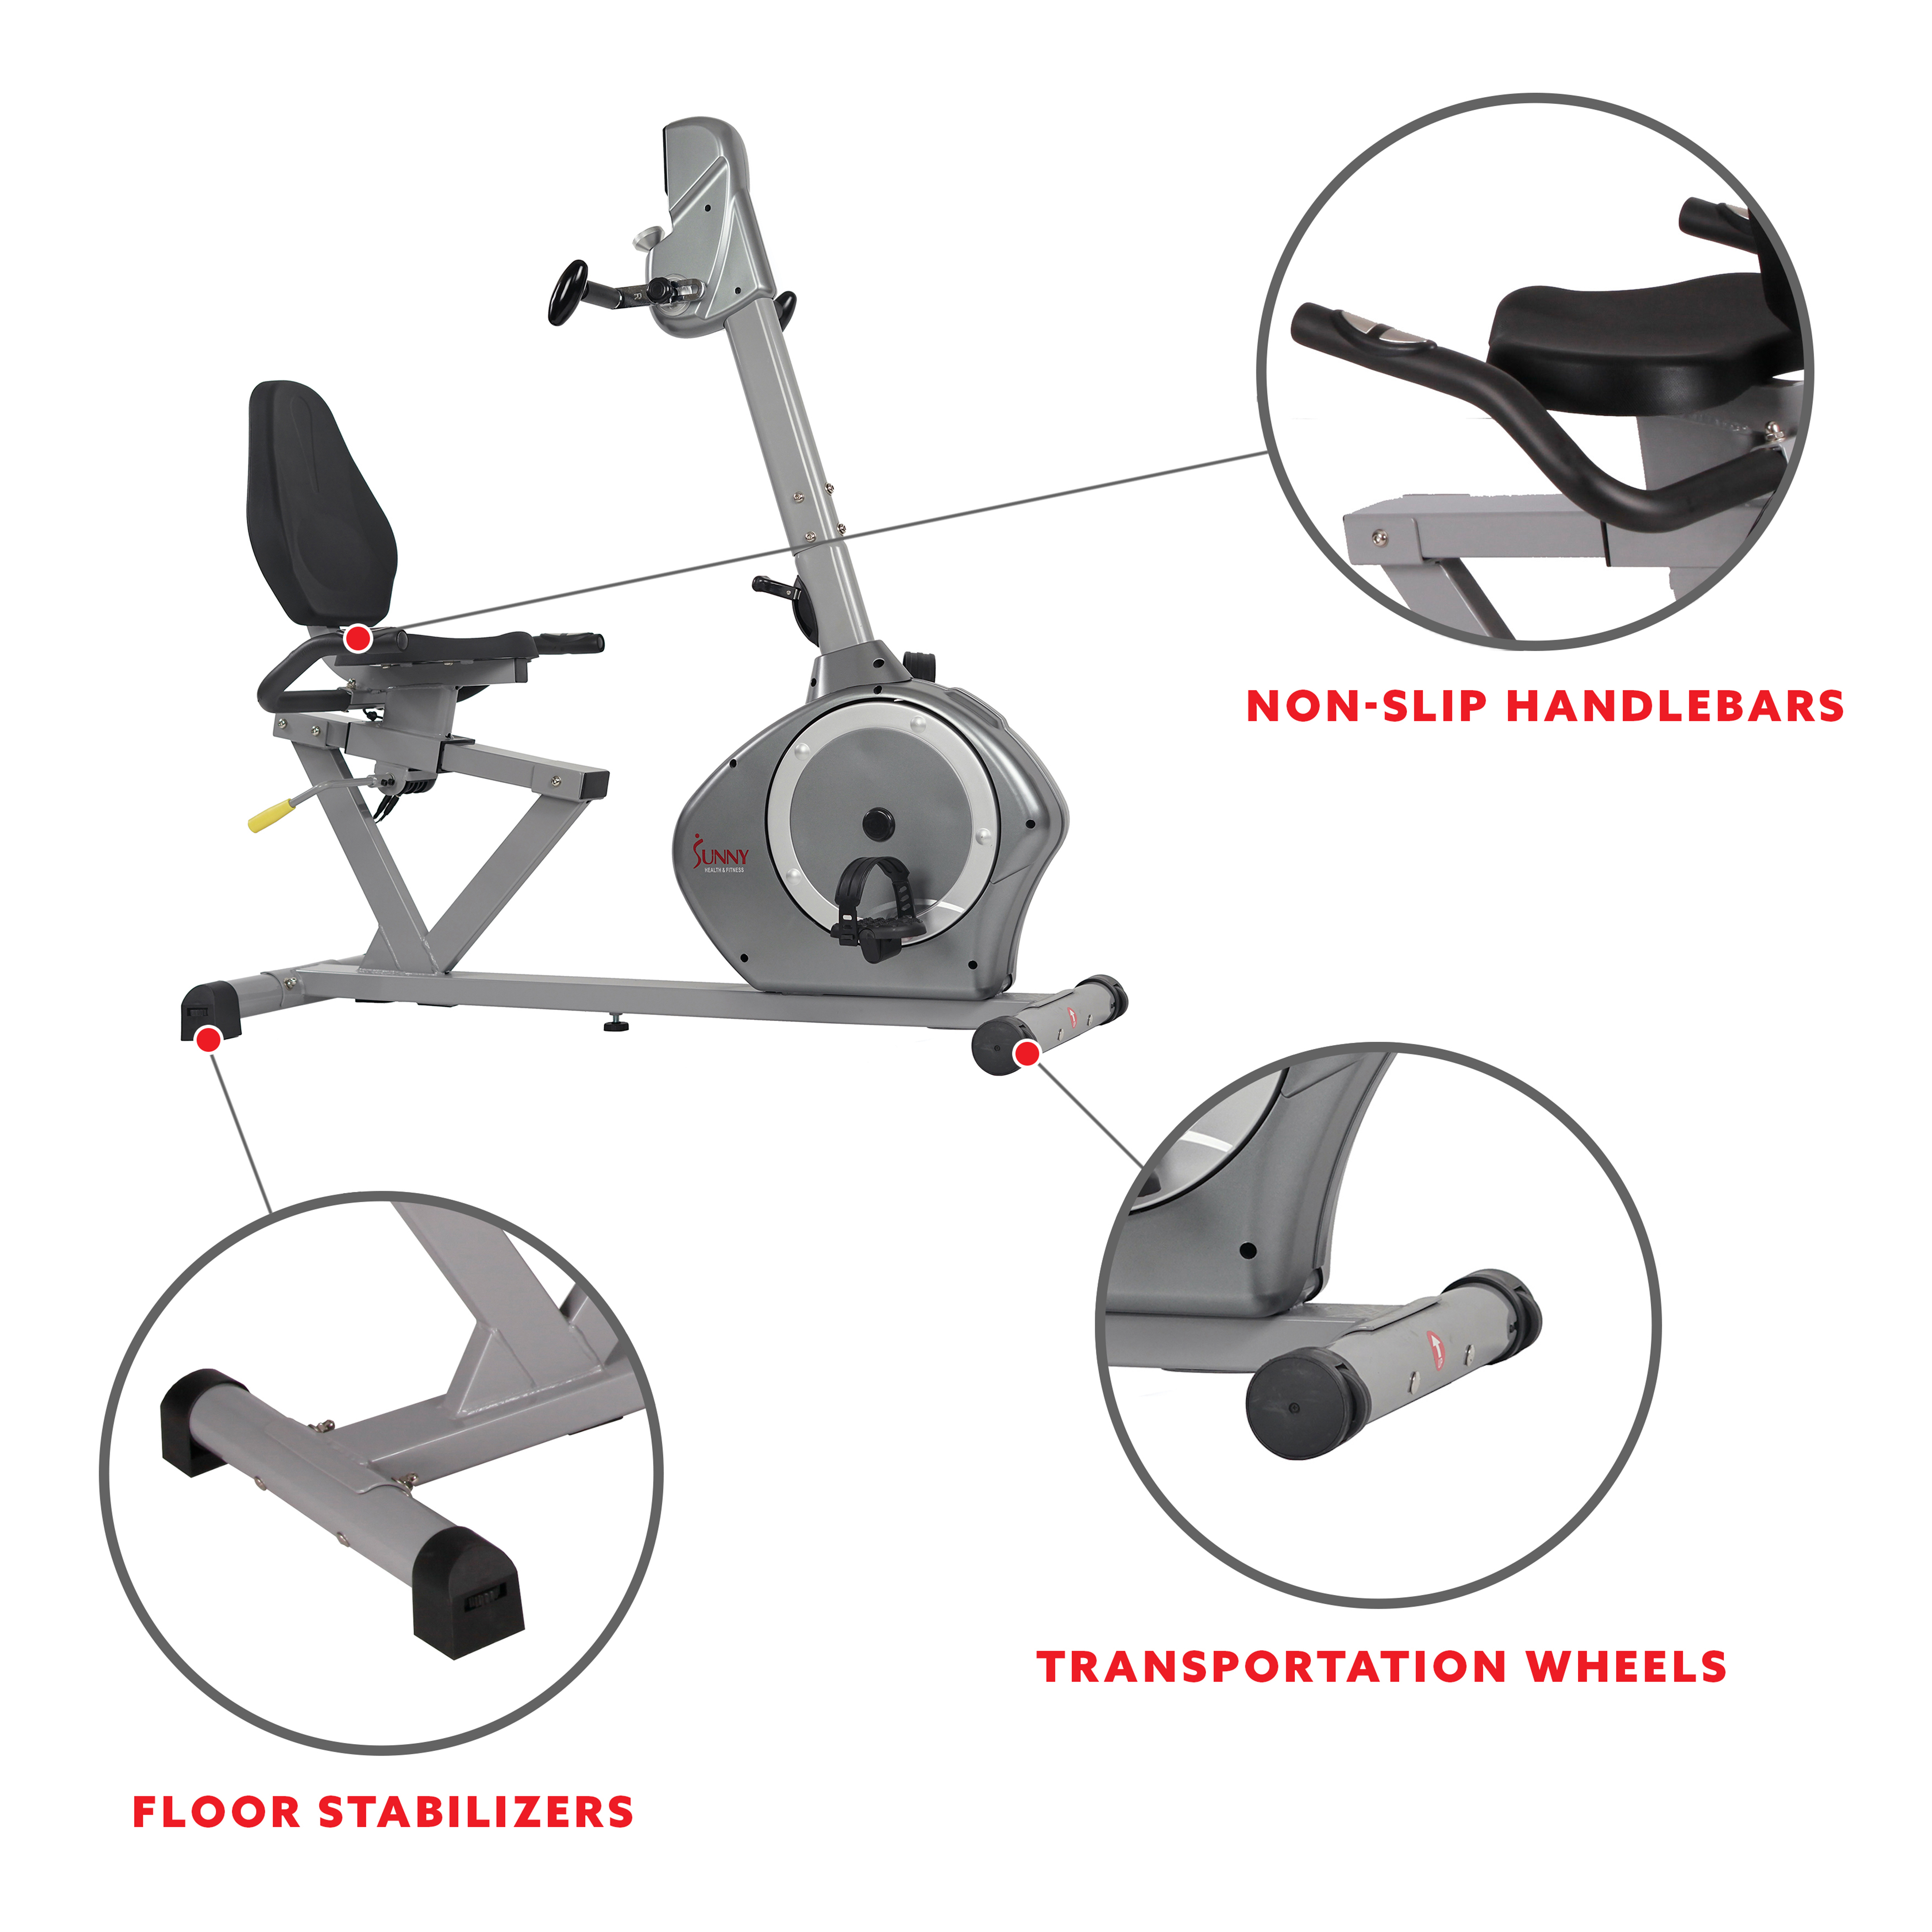 Sunny Health & Fitness Stationary Magnetic Recumbent Indoor Cycle Bike, 350 lb Weight Capacity, Arm Workout Exercisers, SF-RB4631 - image 5 of 8